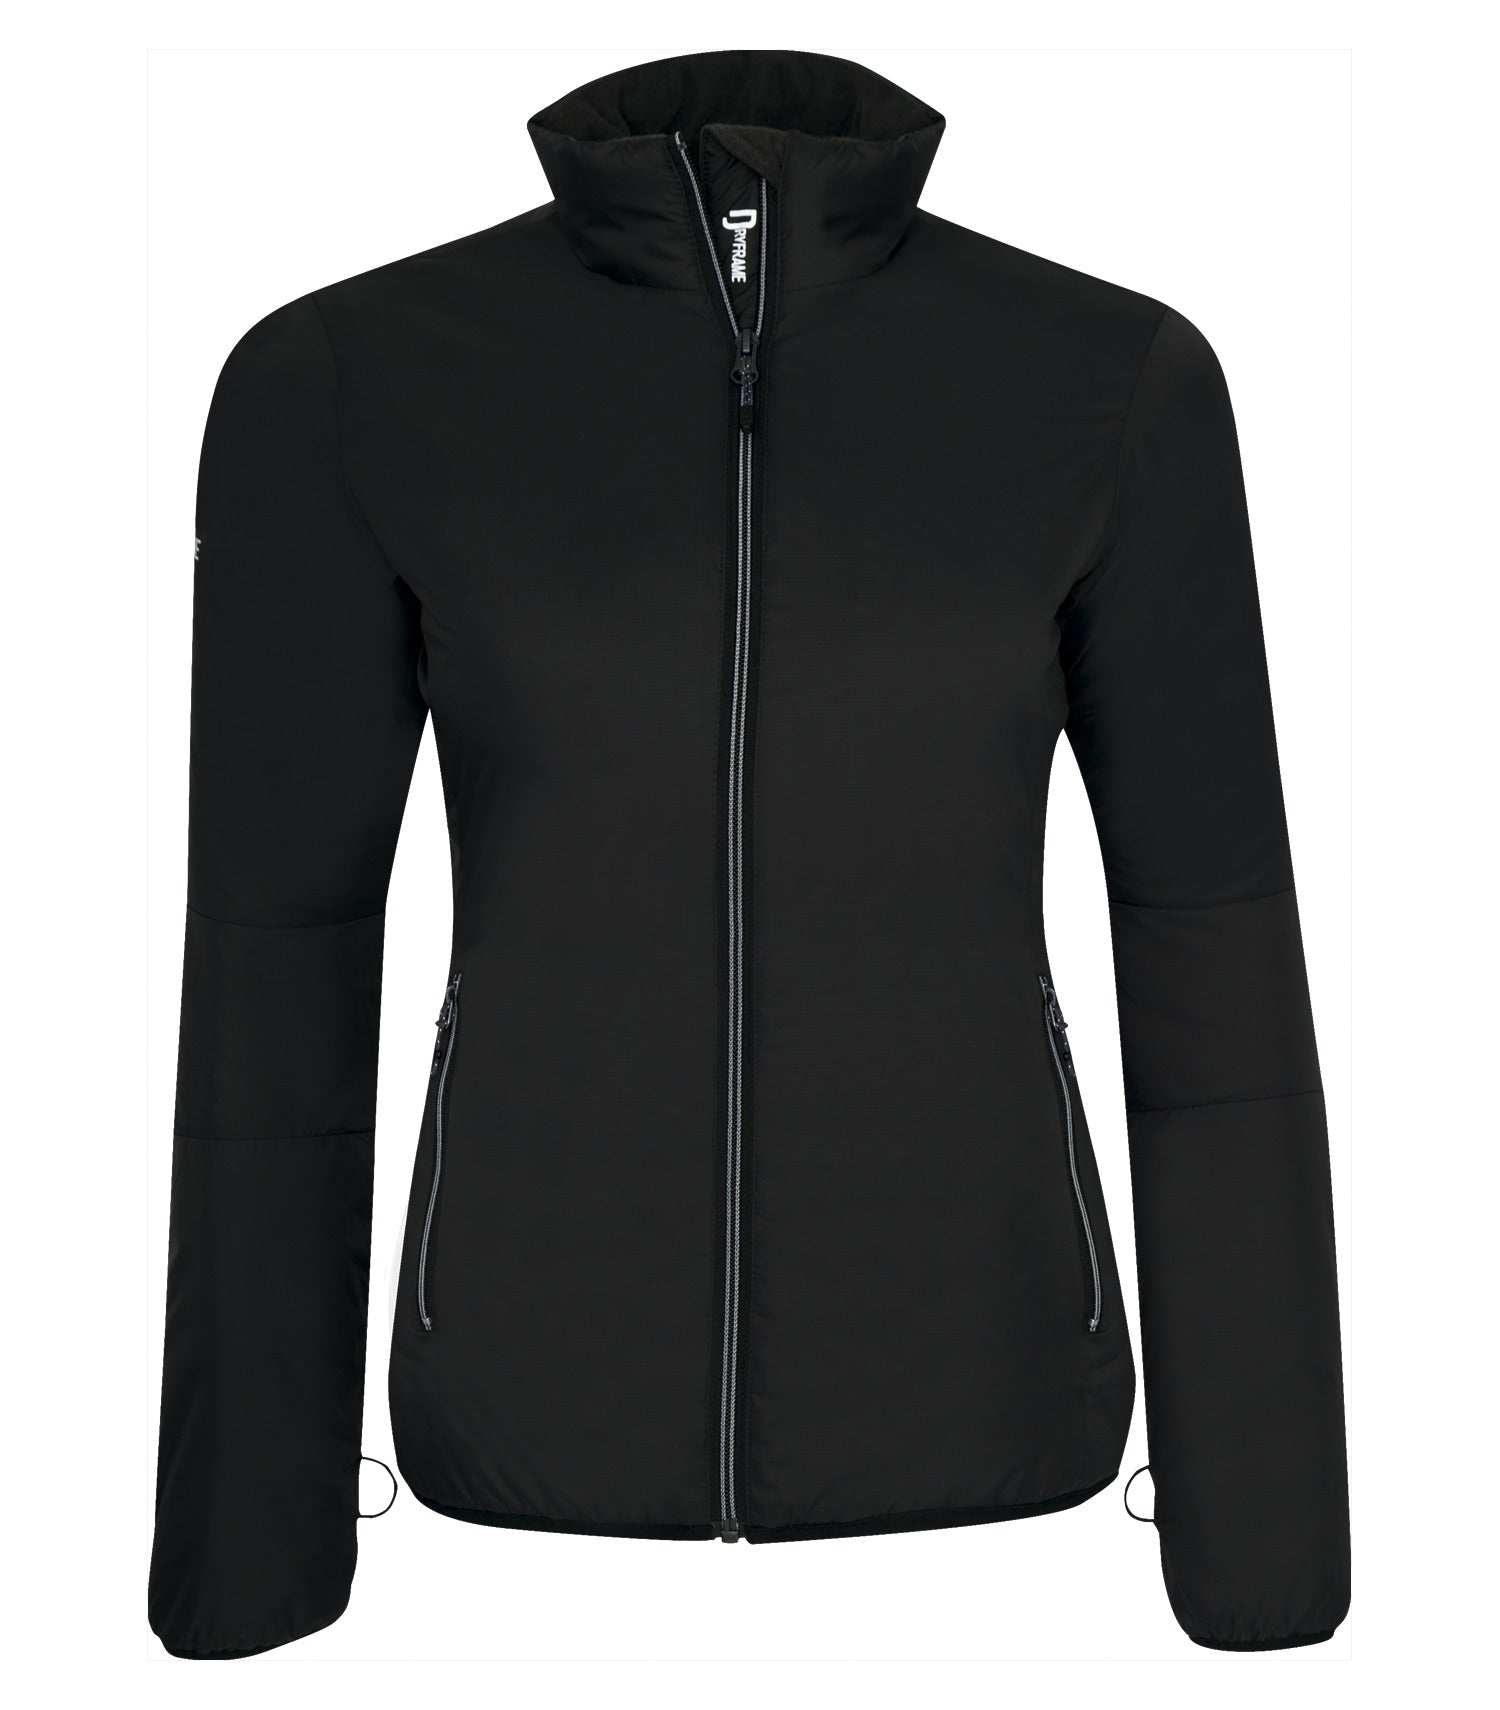 DRYFRAME® DRY TECH INSULATED SYSTEM LADIES' JACKET. DF7635L